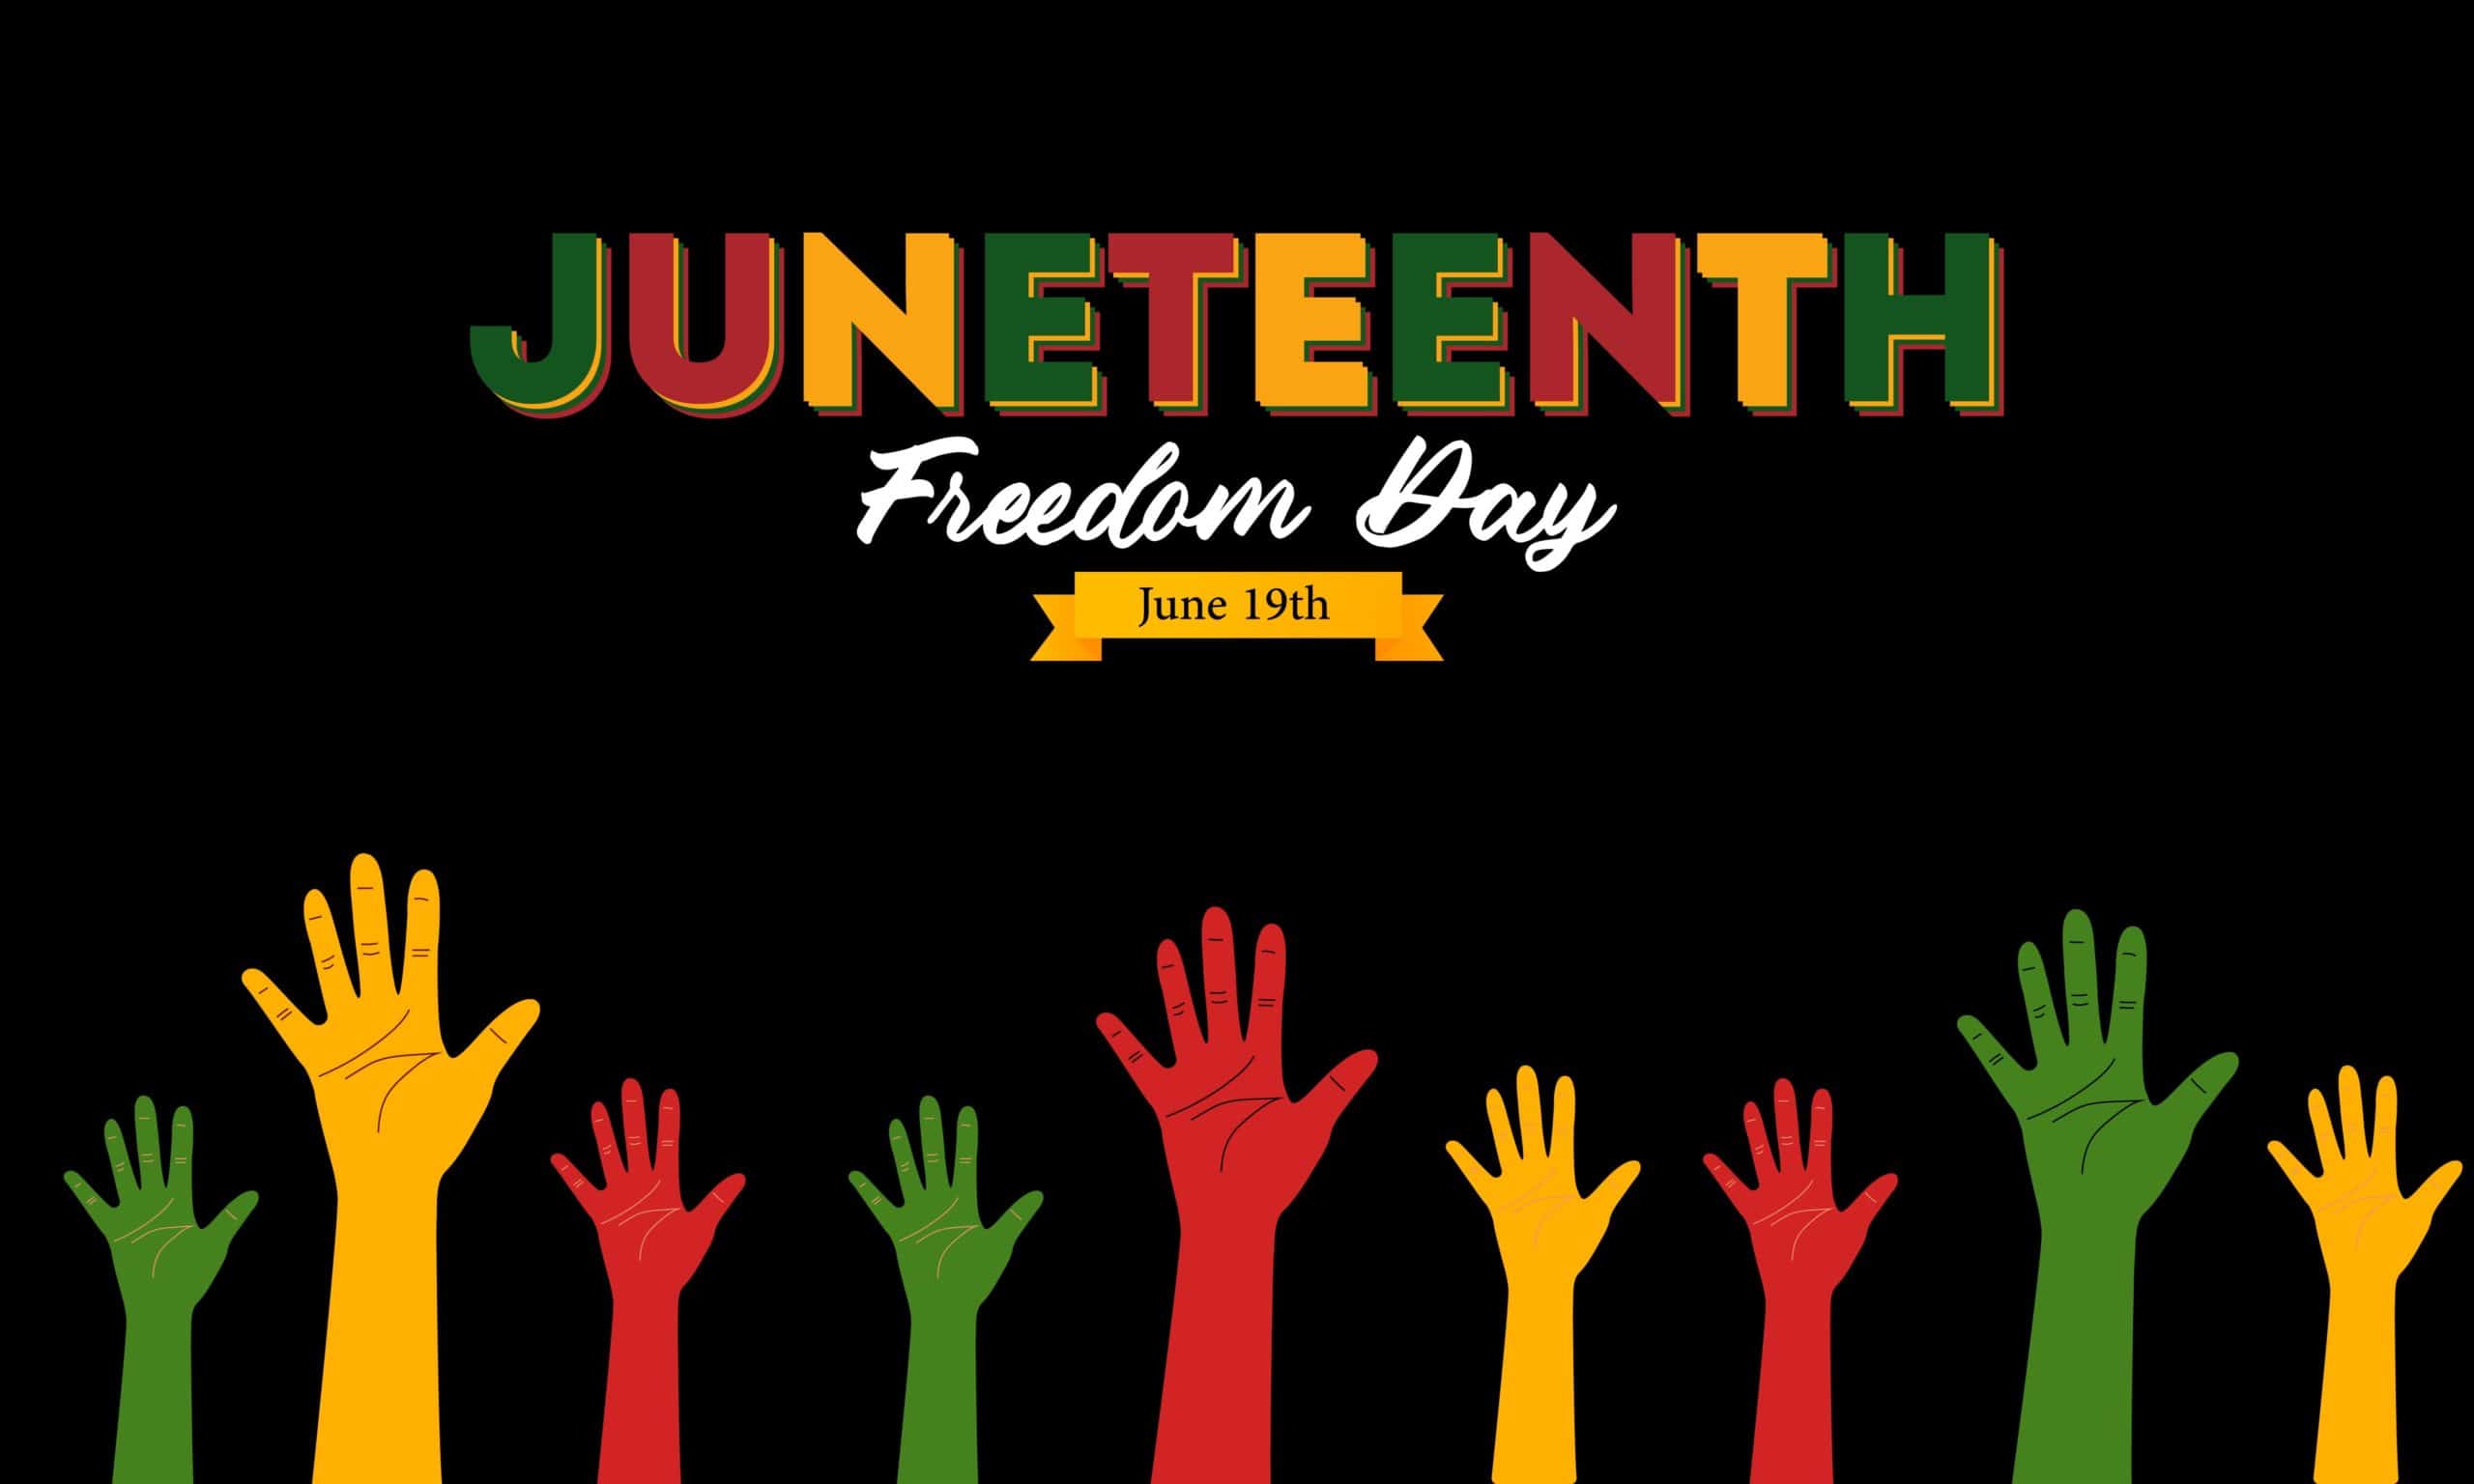 where was the first juneteenth celebration?